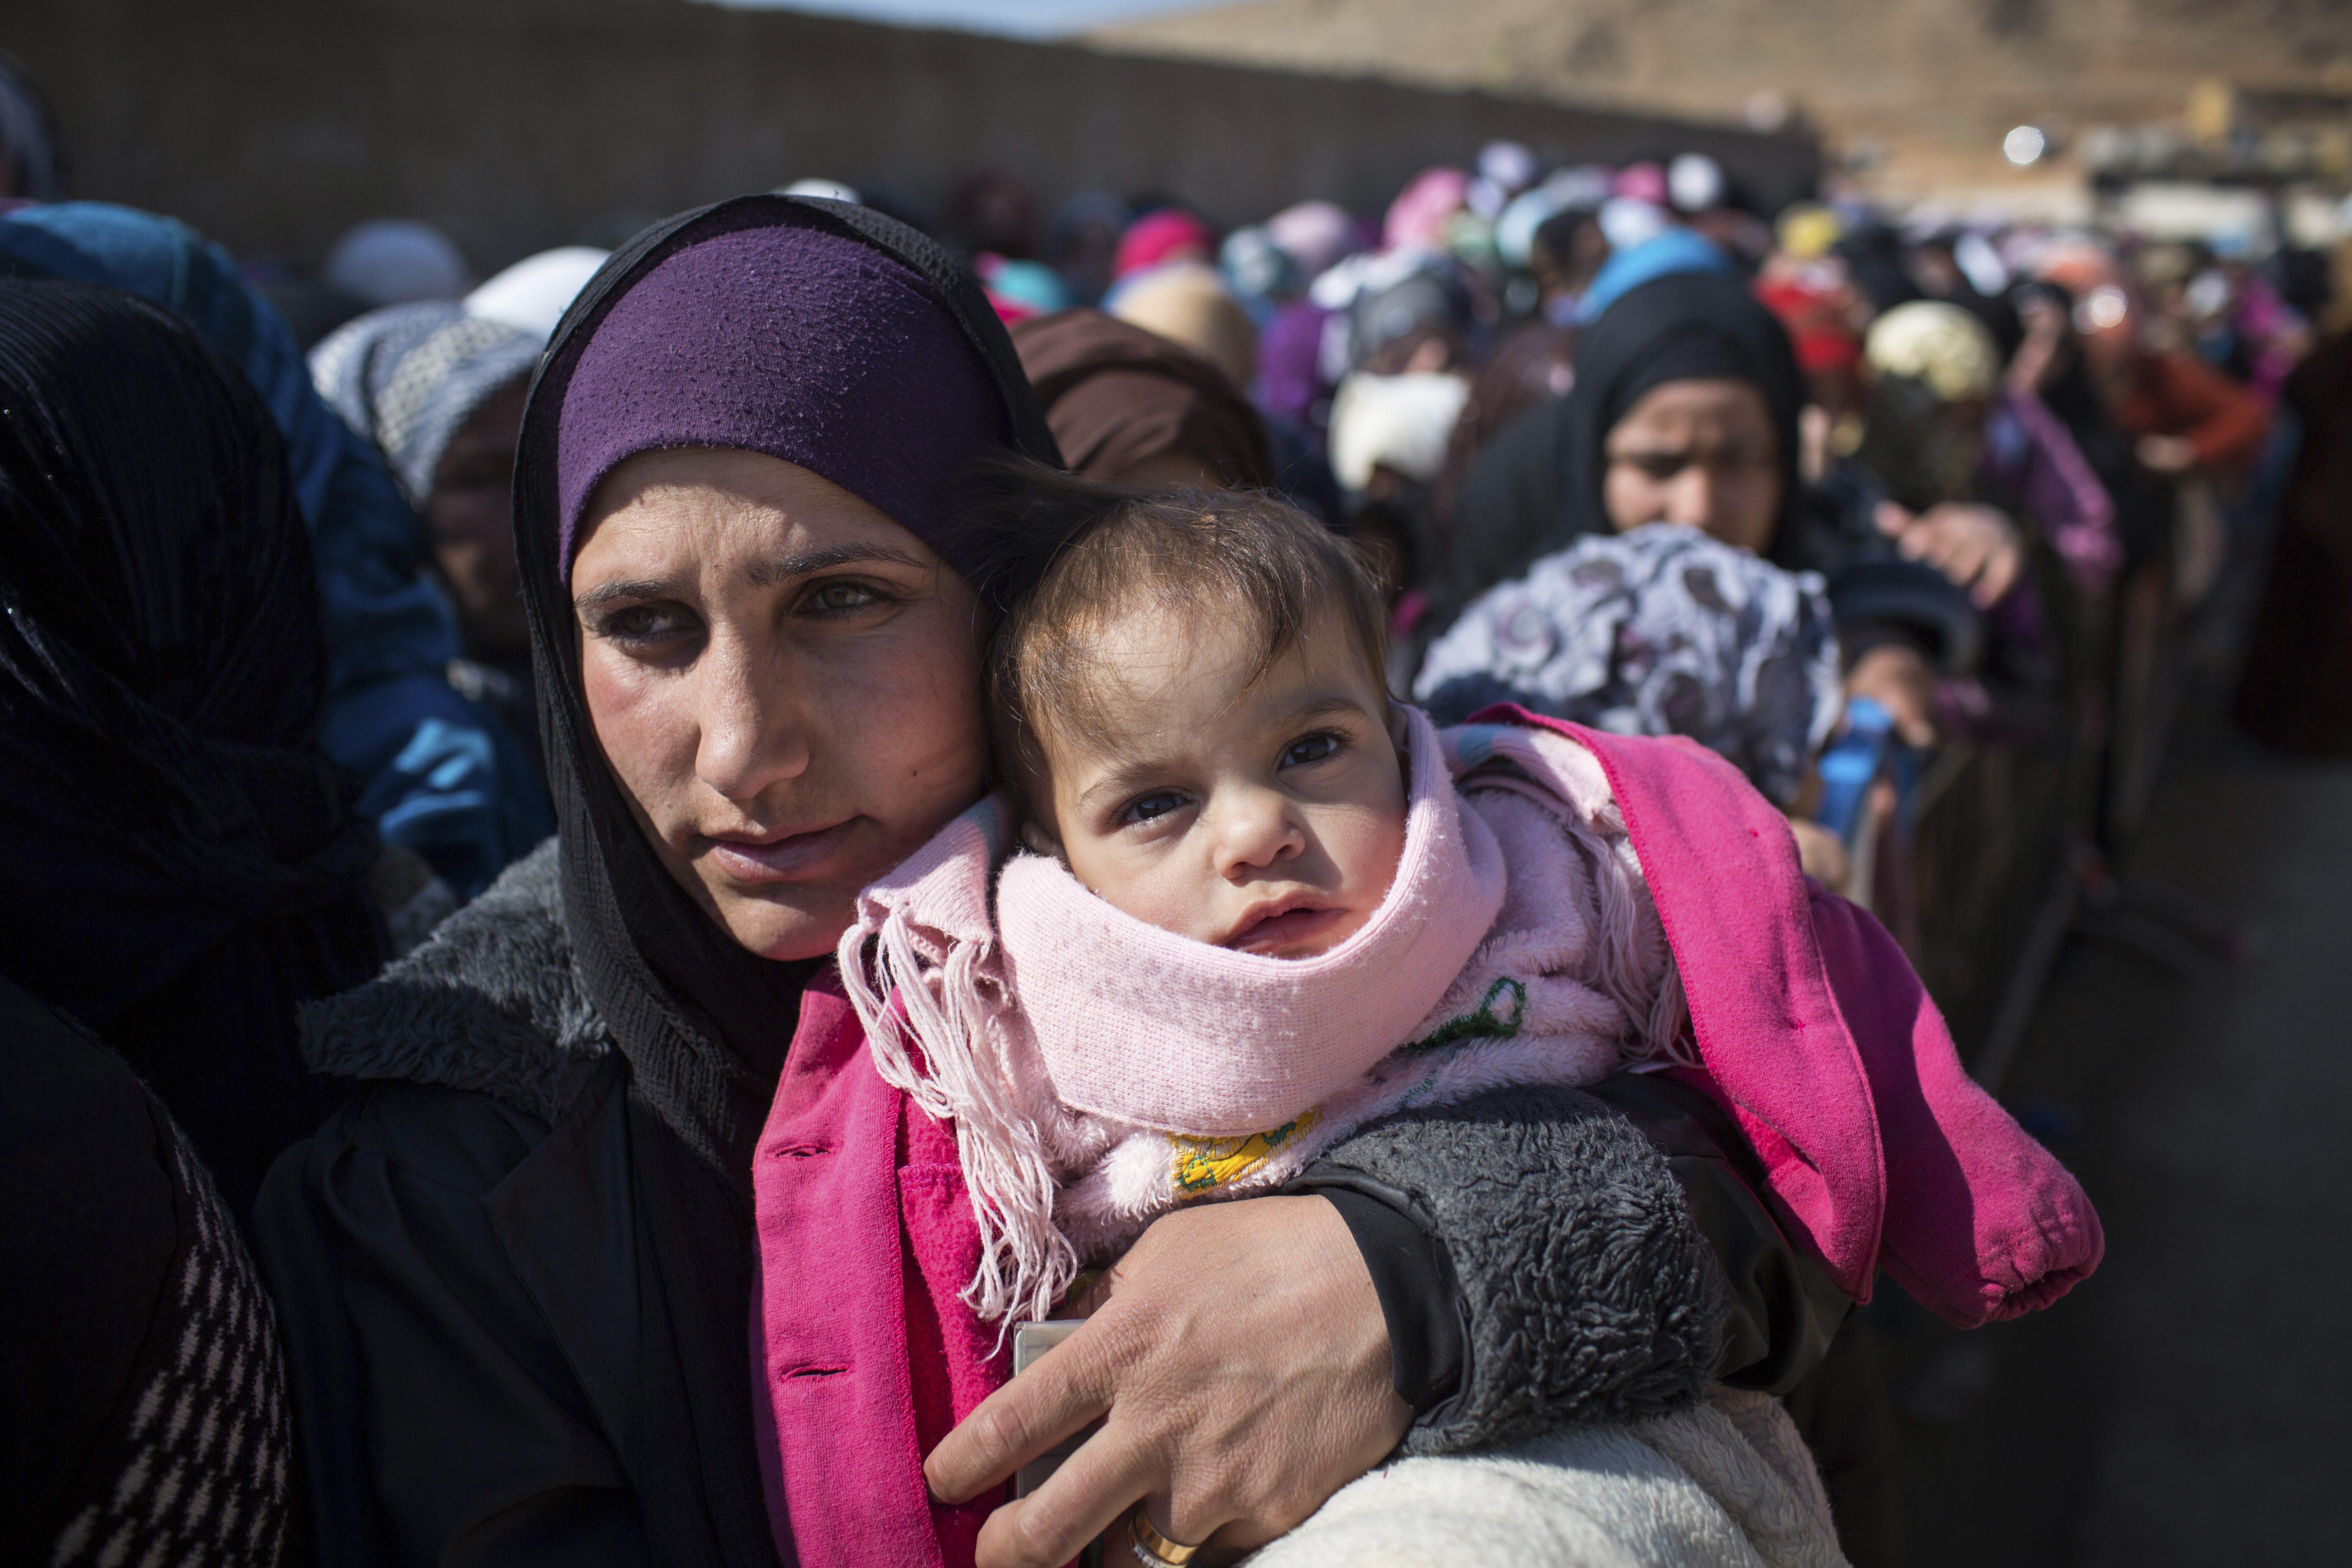 Newly arrived Syrian refugee women and children queue for registration and aid distribution in the town of Arsal, Lebanon, on 17 February 2014.